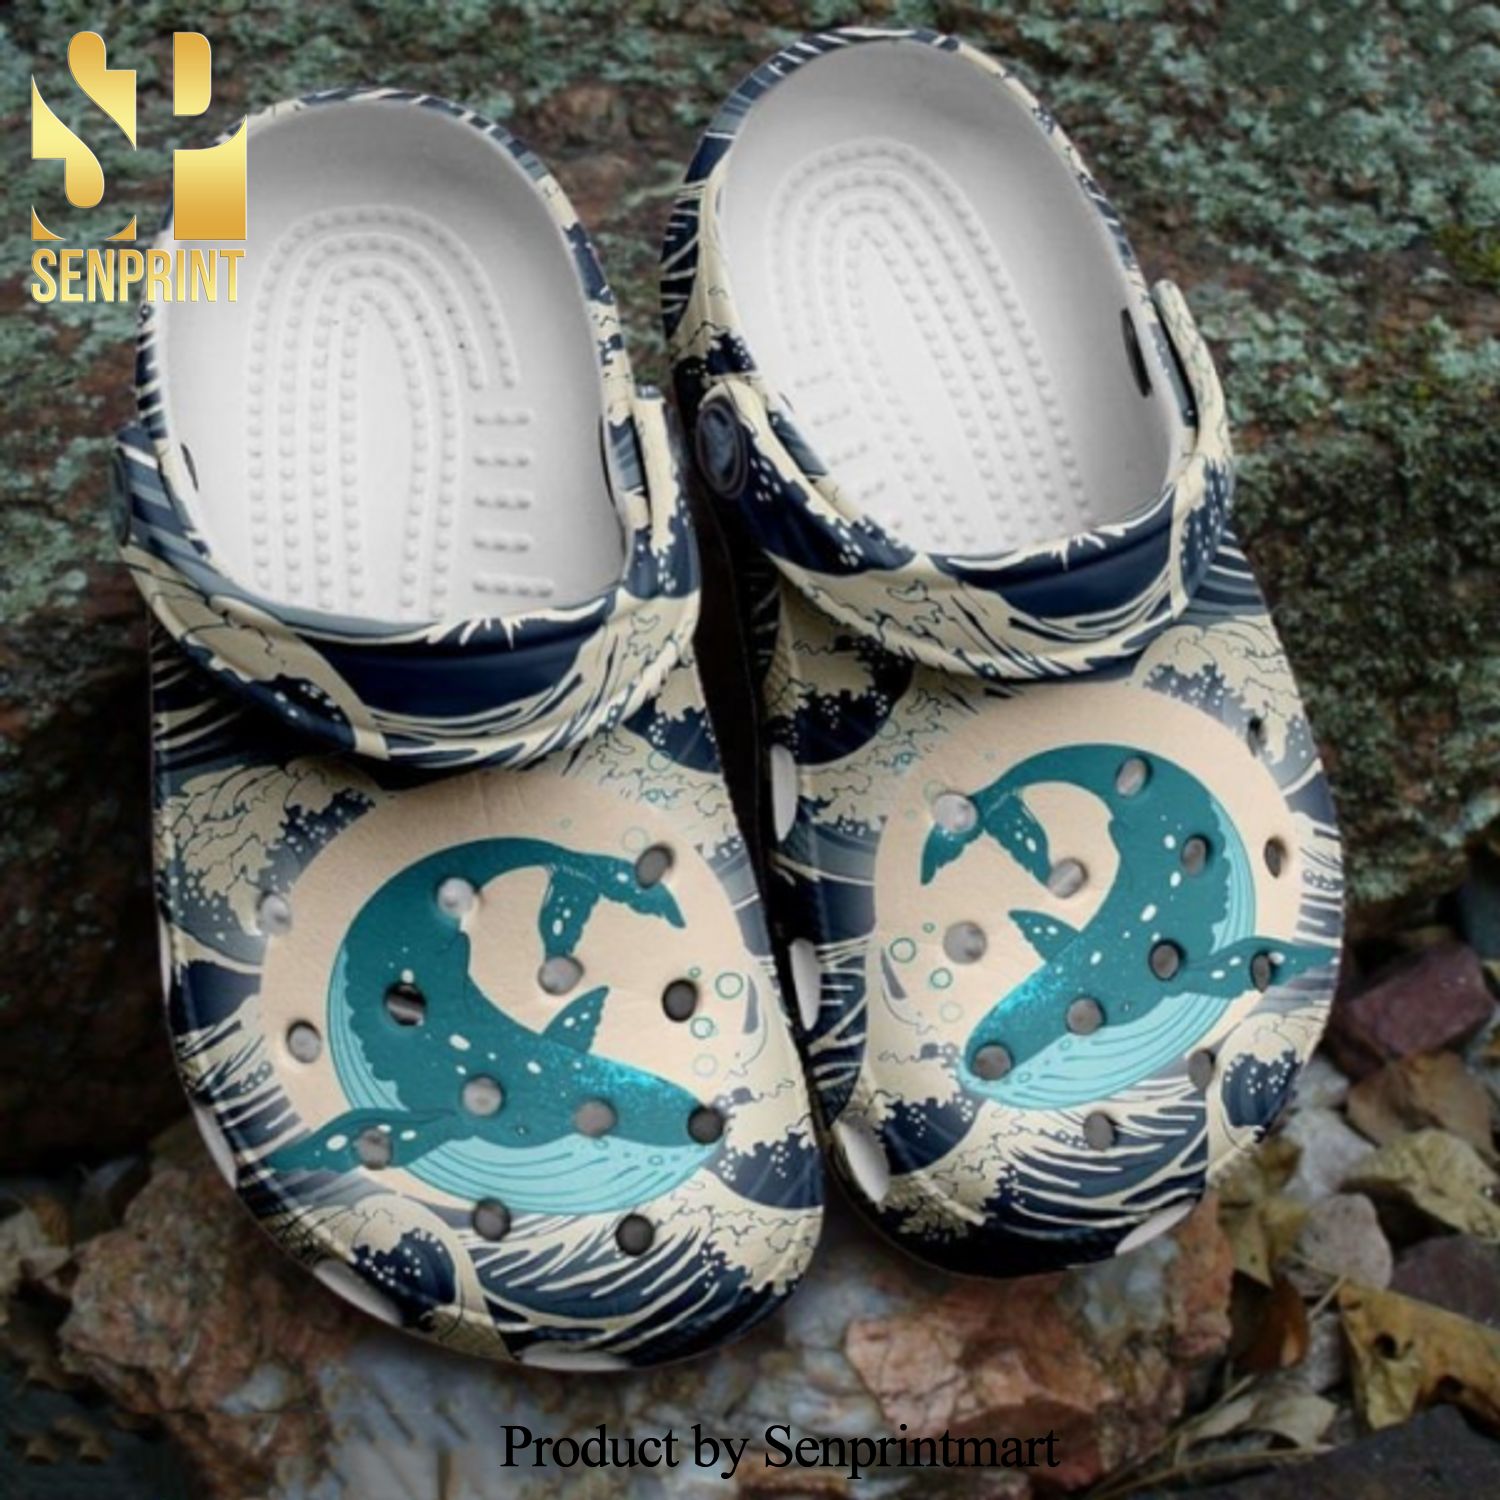 Waves Whale Graphic In The Ocean Adults Kids Crocband Clogs New Outfit Unisex Crocs Crocband Clog